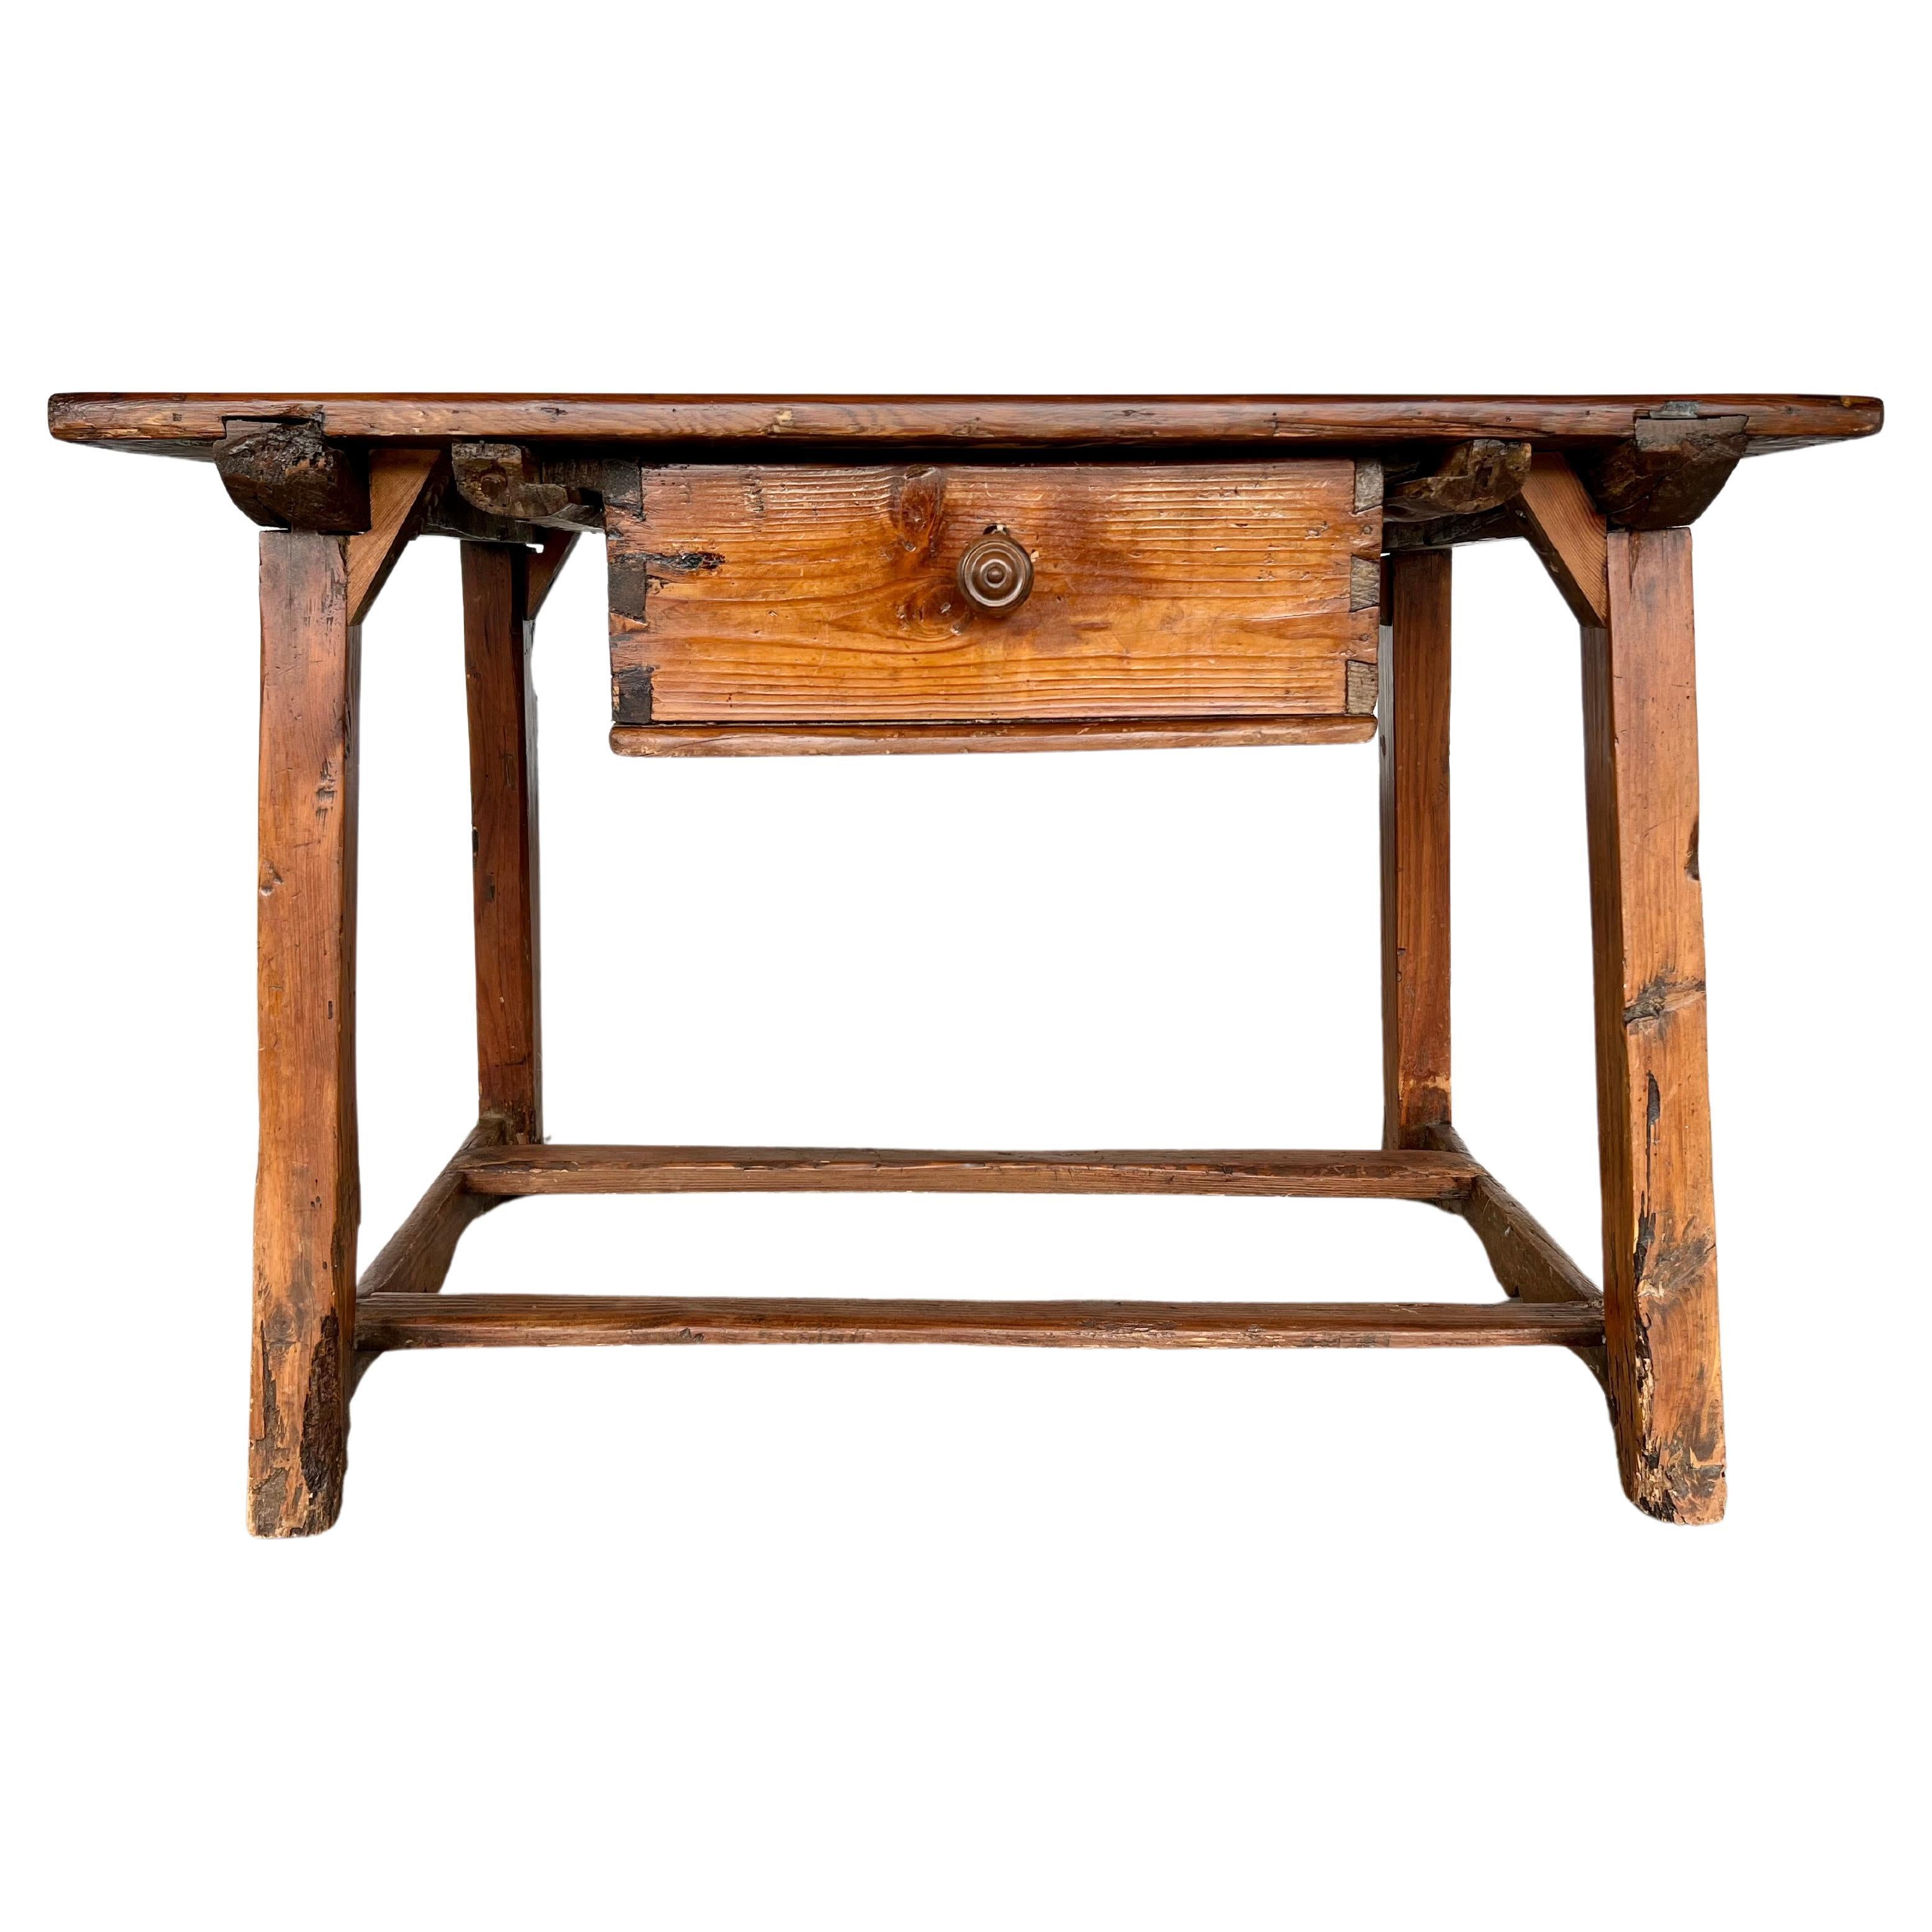 Antique 17c Spanish Rustic Work Table or Side Kitchen Table With Single Drawer